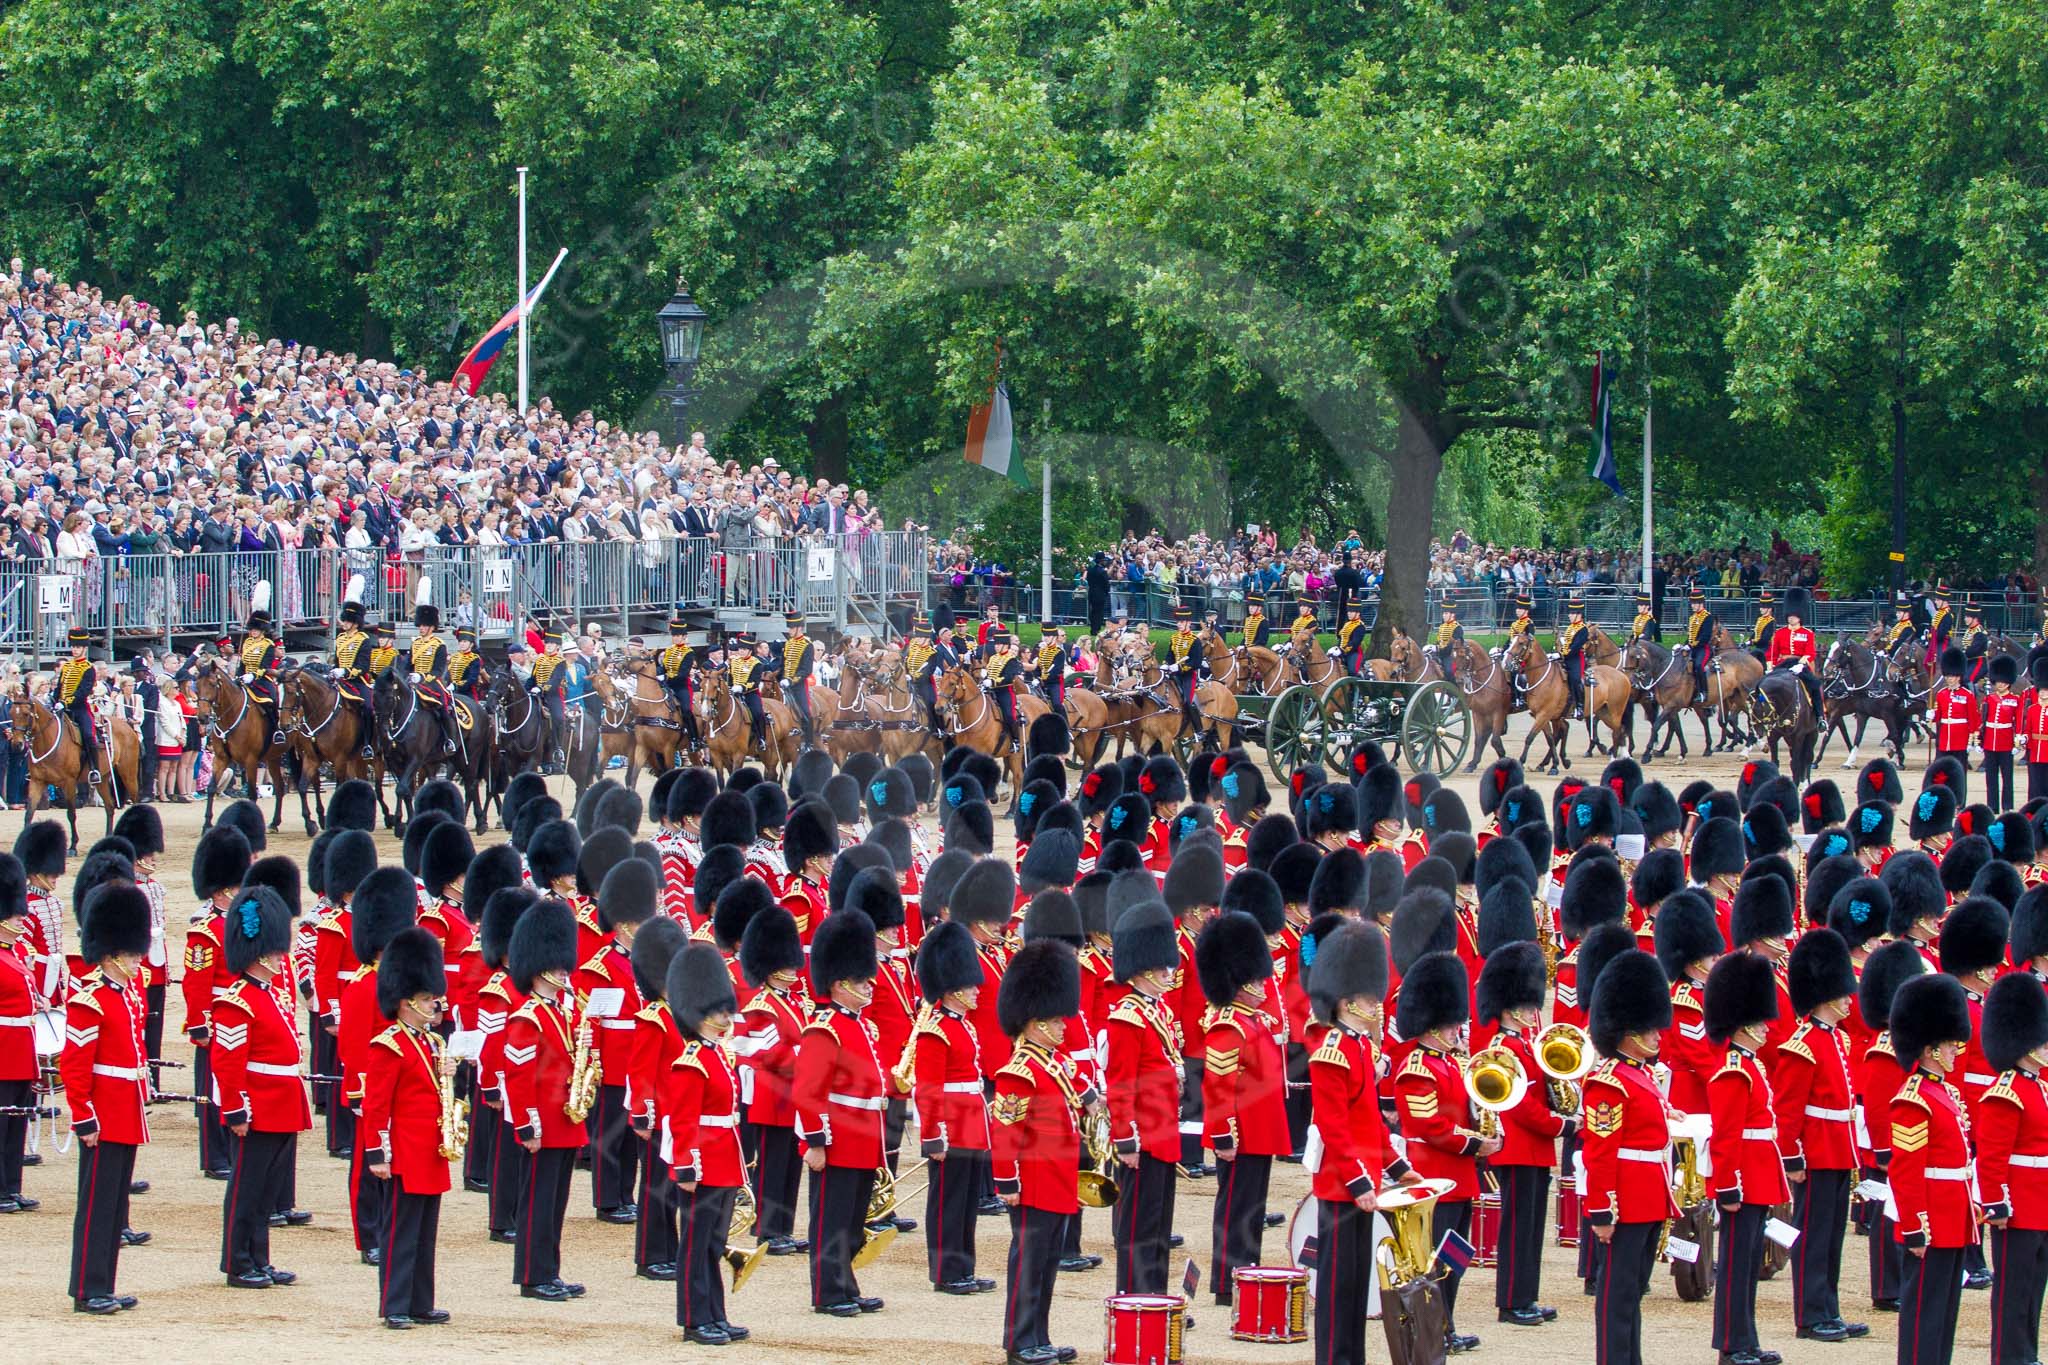 Trooping the Colour 2014.
Horse Guards Parade, Westminster,
London SW1A,

United Kingdom,
on 14 June 2014 at 11:54, image #732